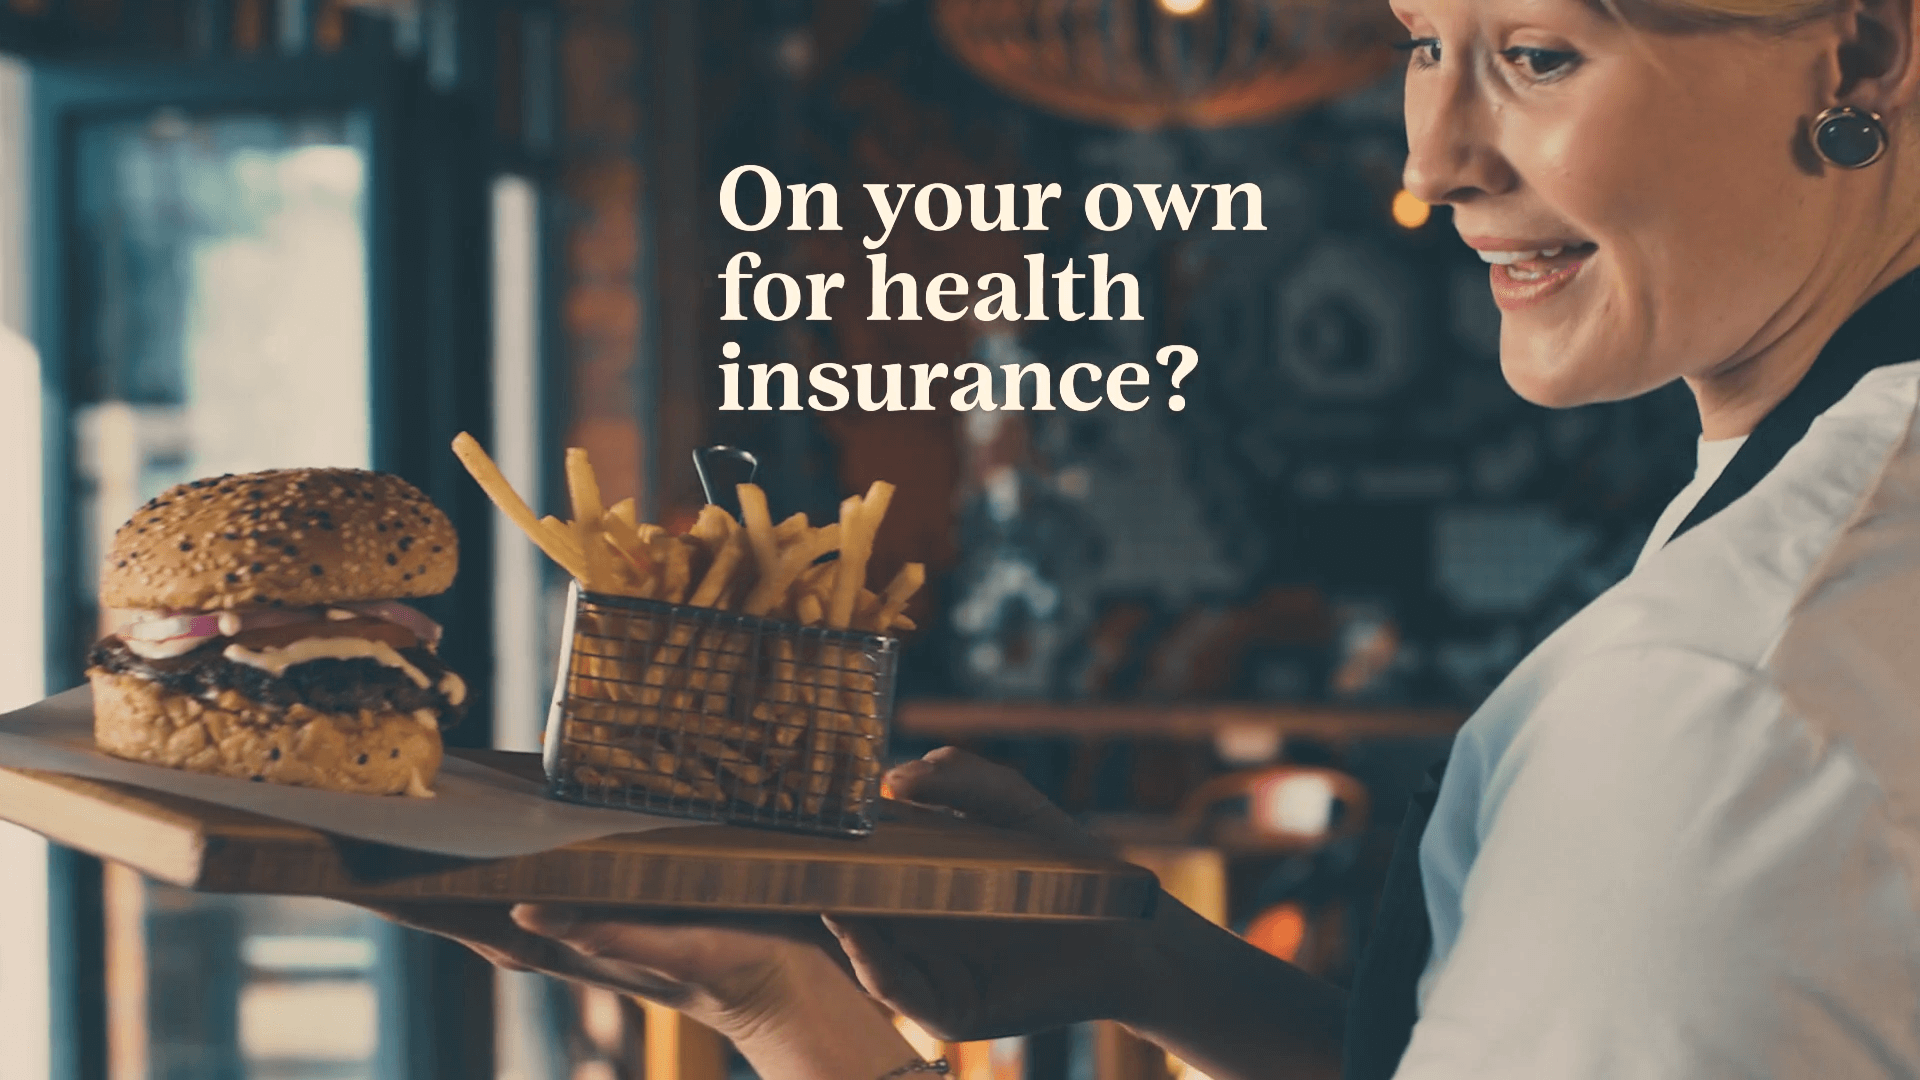 On your own for health insurance?